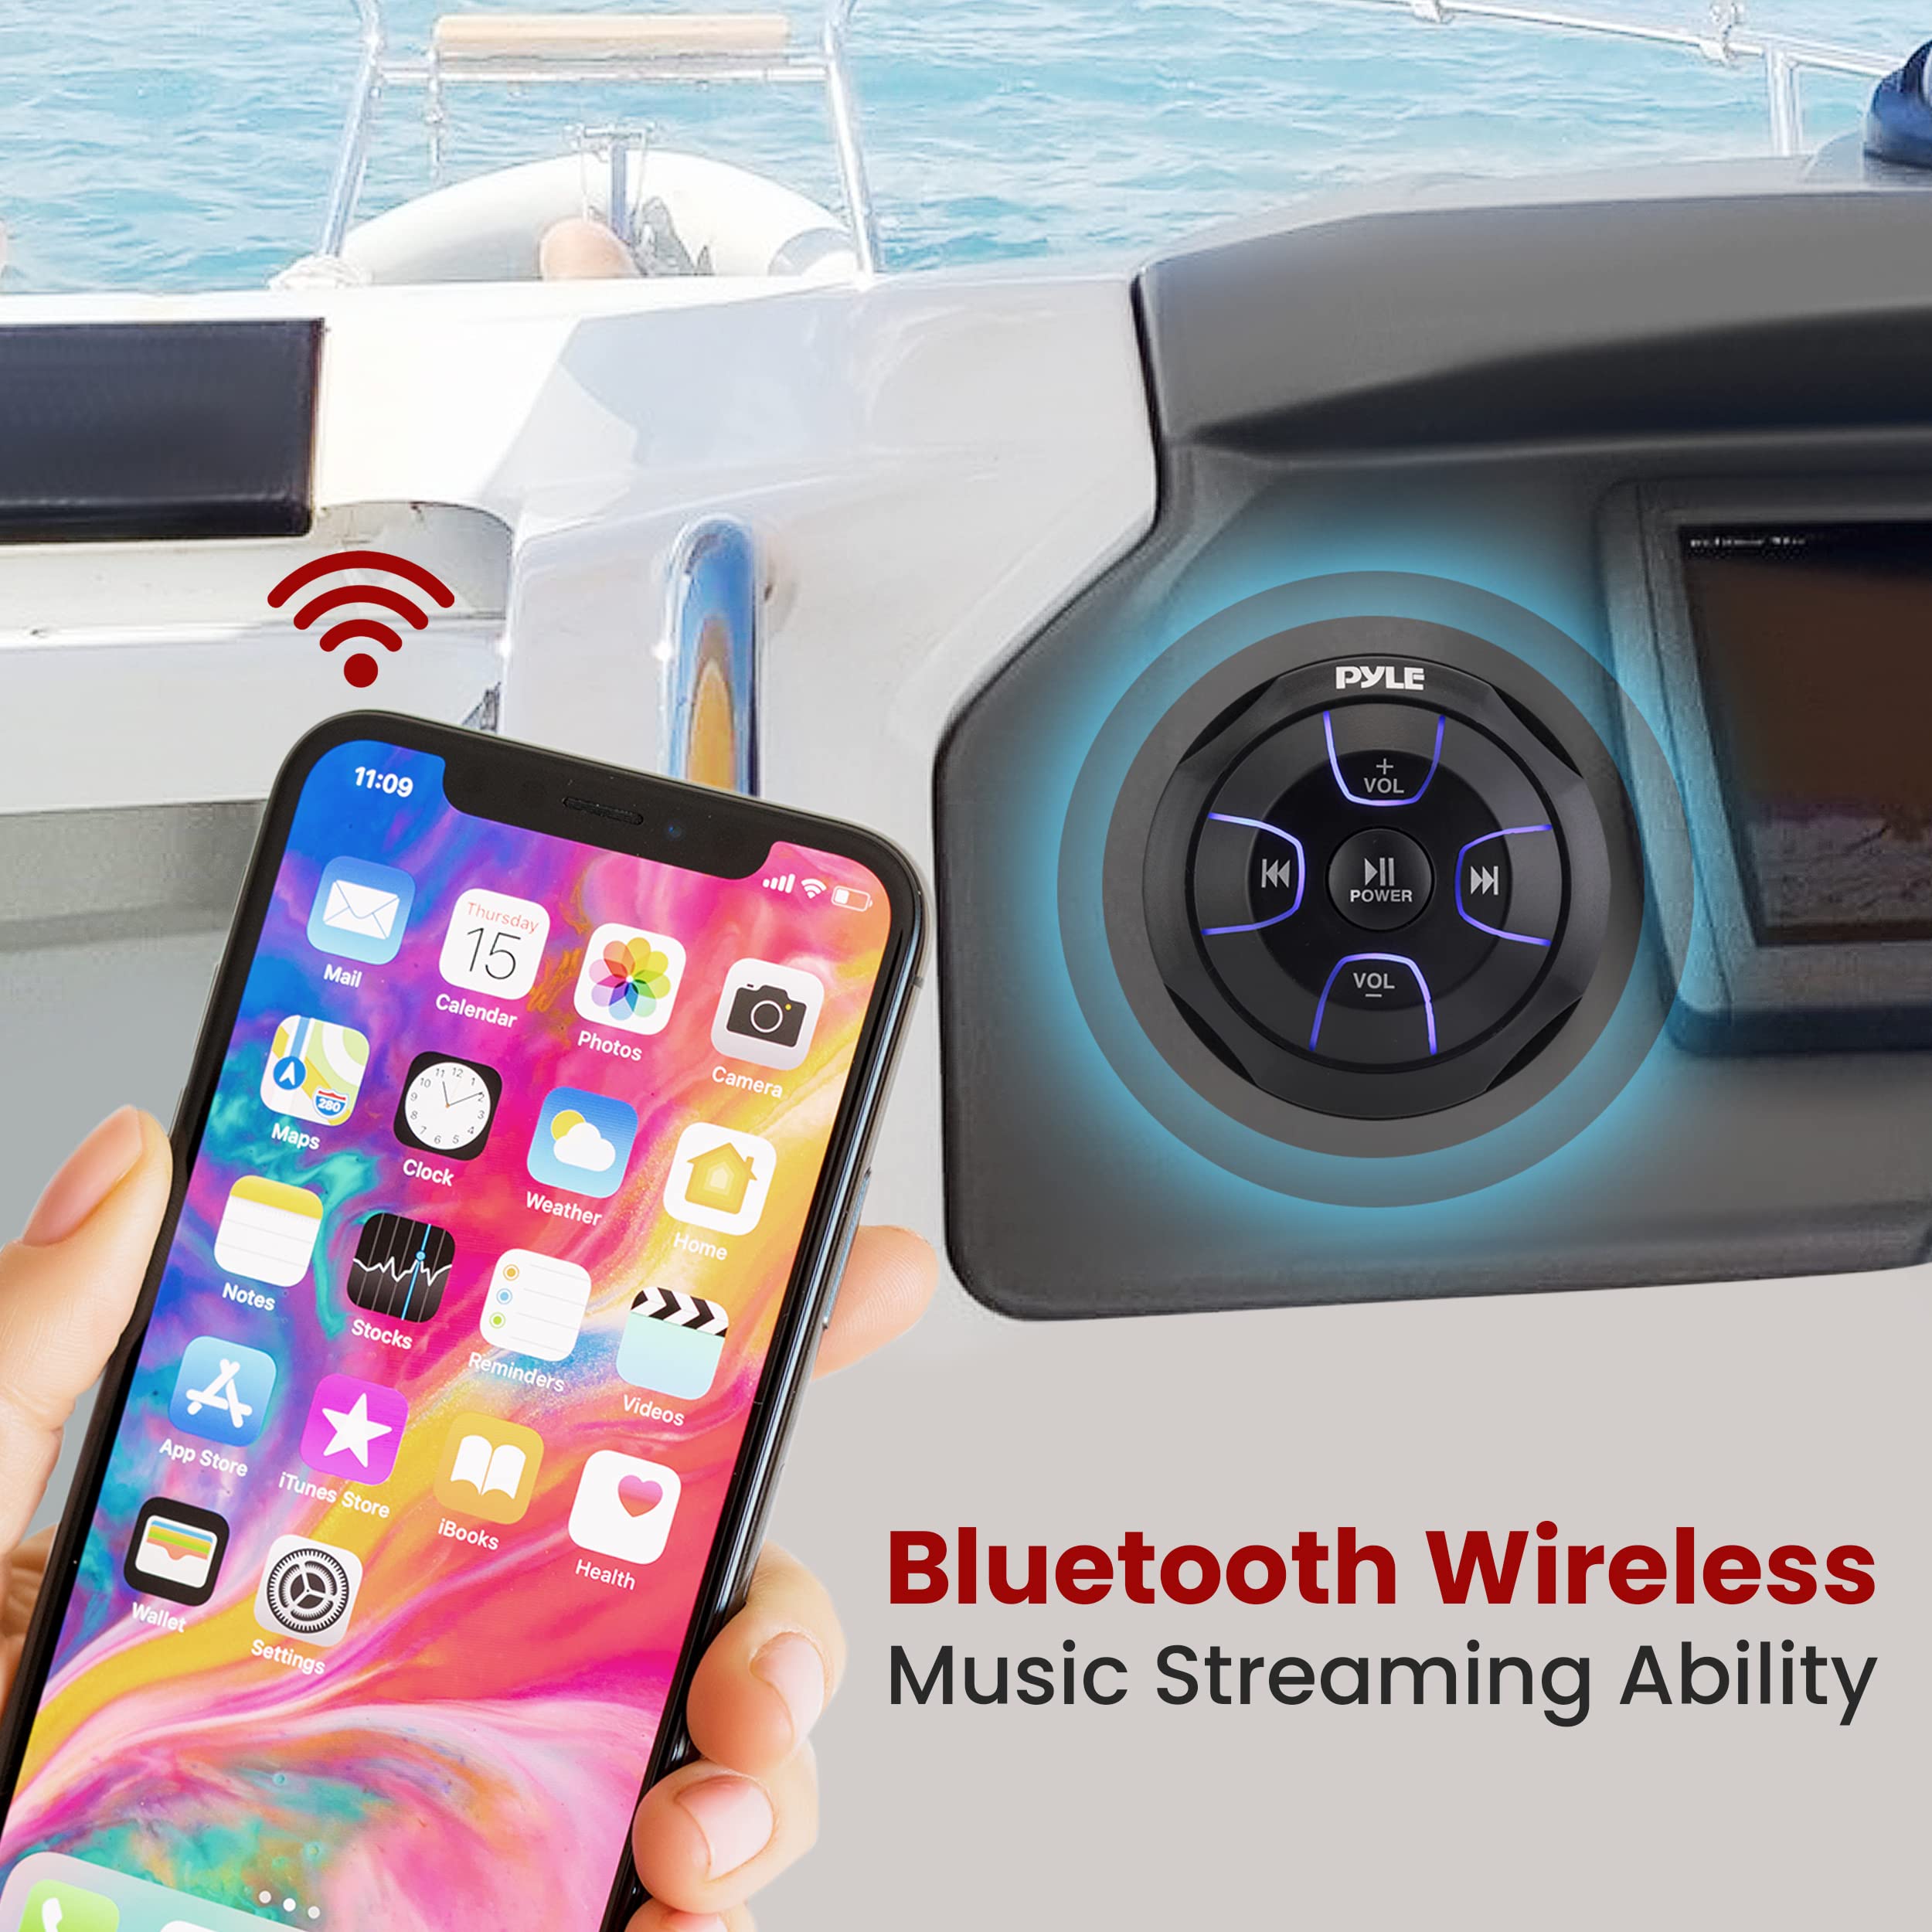 Waterproof Bluetooth Marine Amplifier Receiver - Weatherproof 2 Channel Wireless Amp for Stereo Speaker with 600 Watt Power, Wired RCA, AUX and MP3 Audio Input Cable - Pyle PLMRMBT5B (Black)